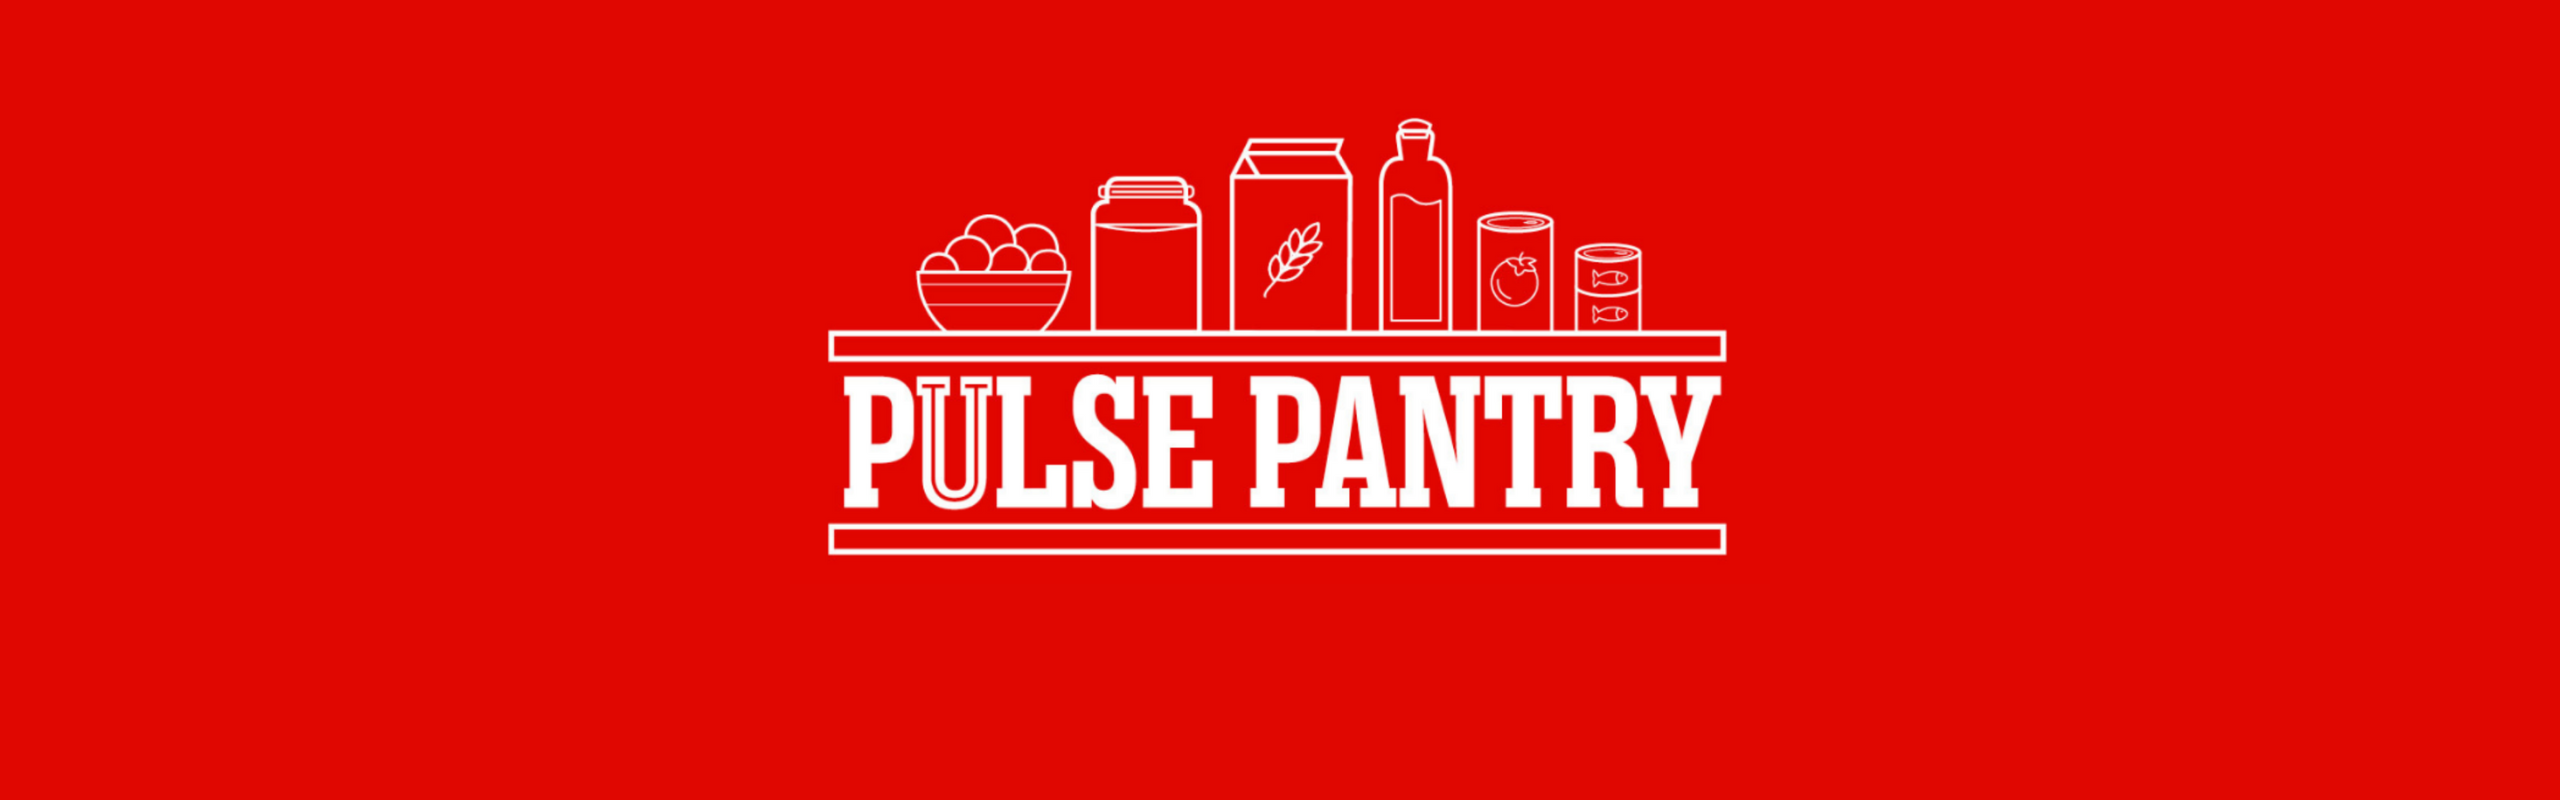 Pulse Pantry Banner